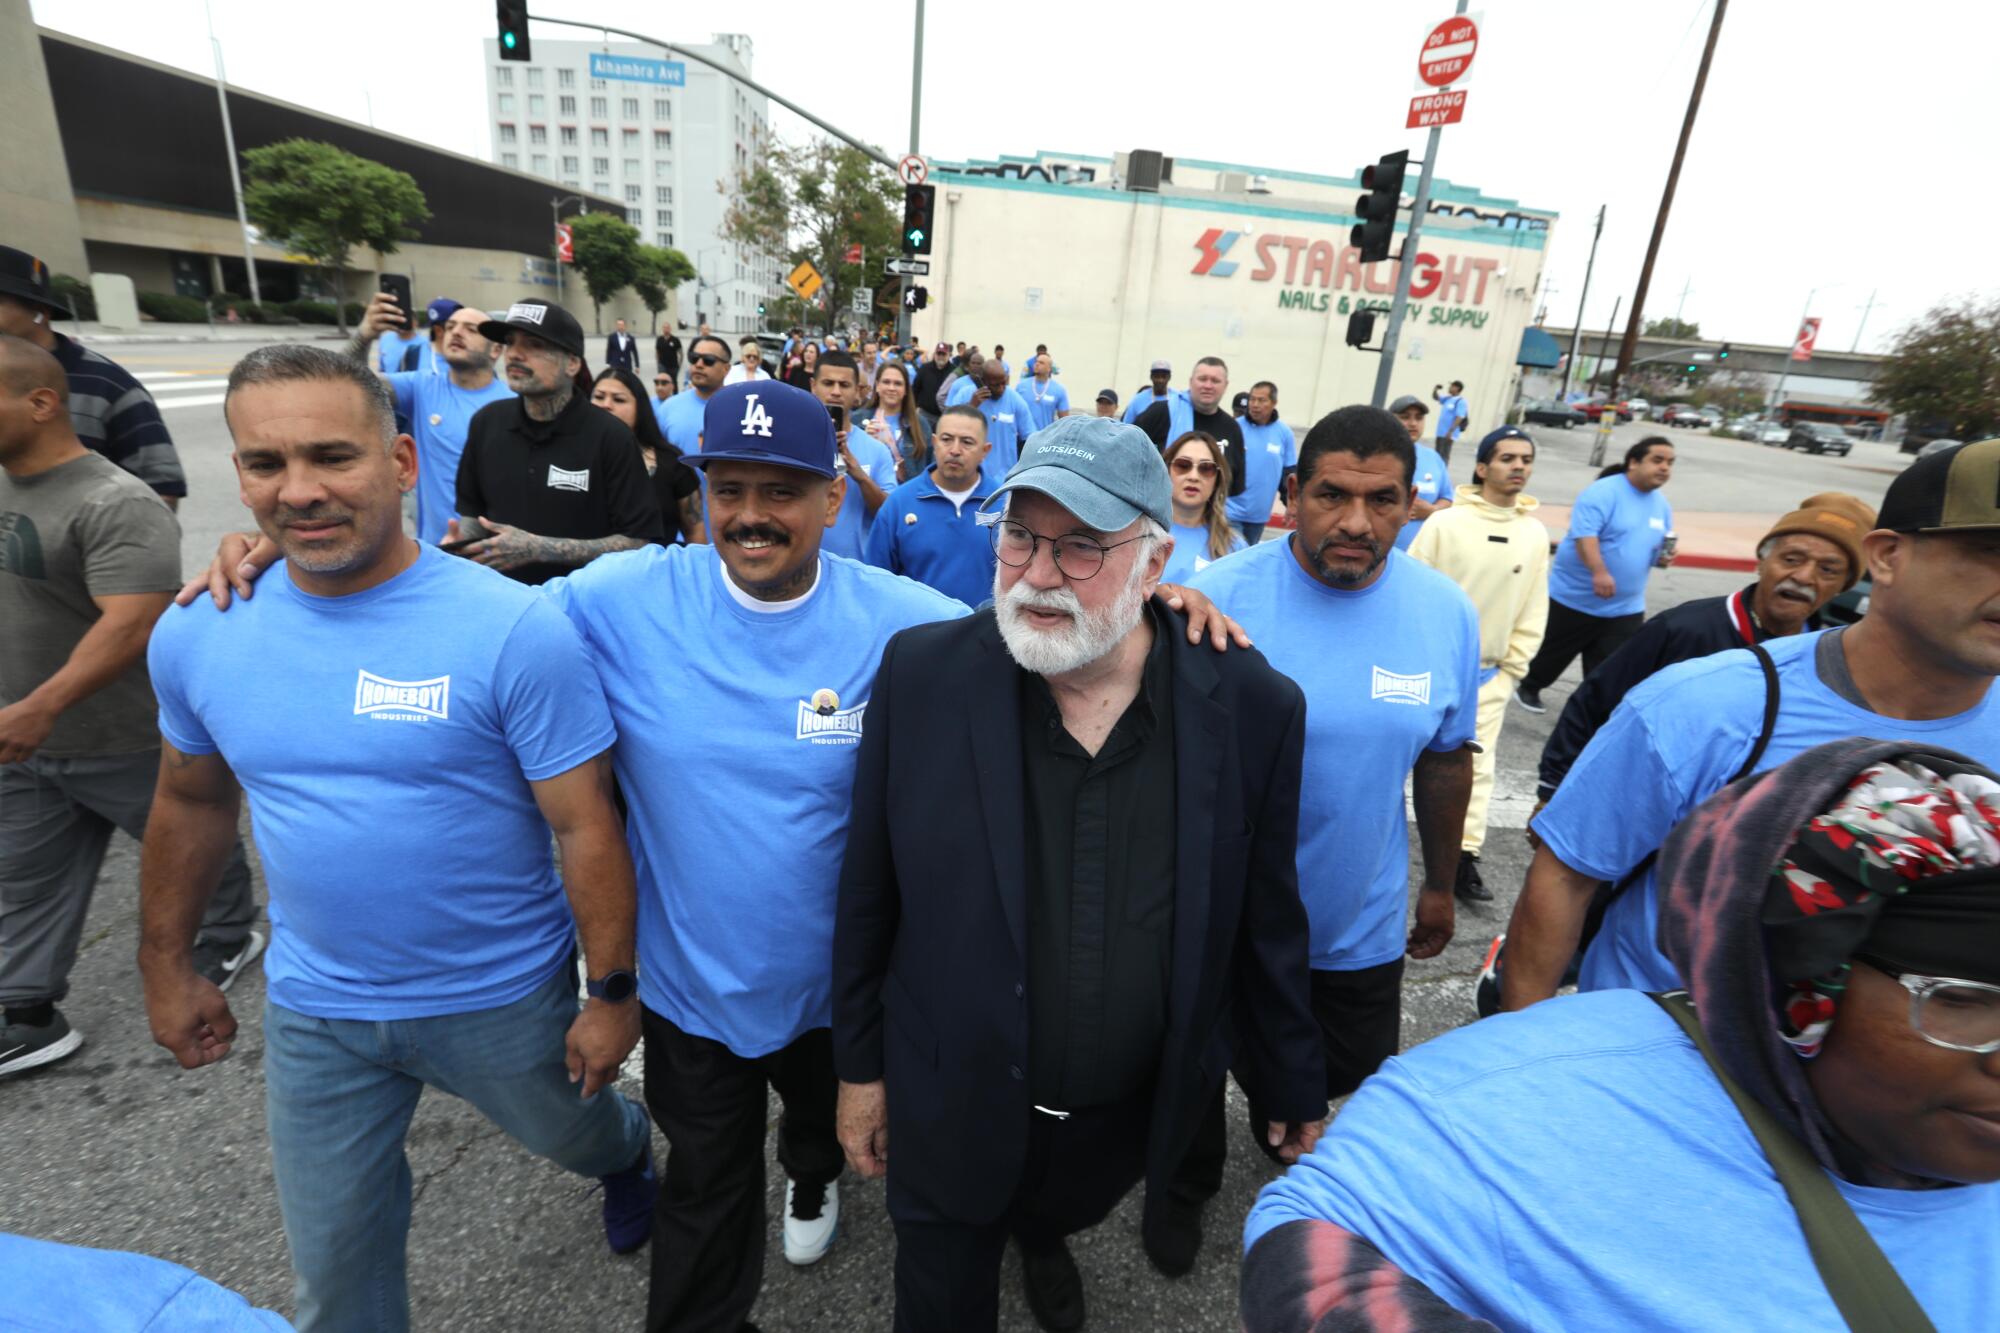 Father Greg Boyle, center, marches to City Hall from Homeboy Industries with staff and program enrollees.